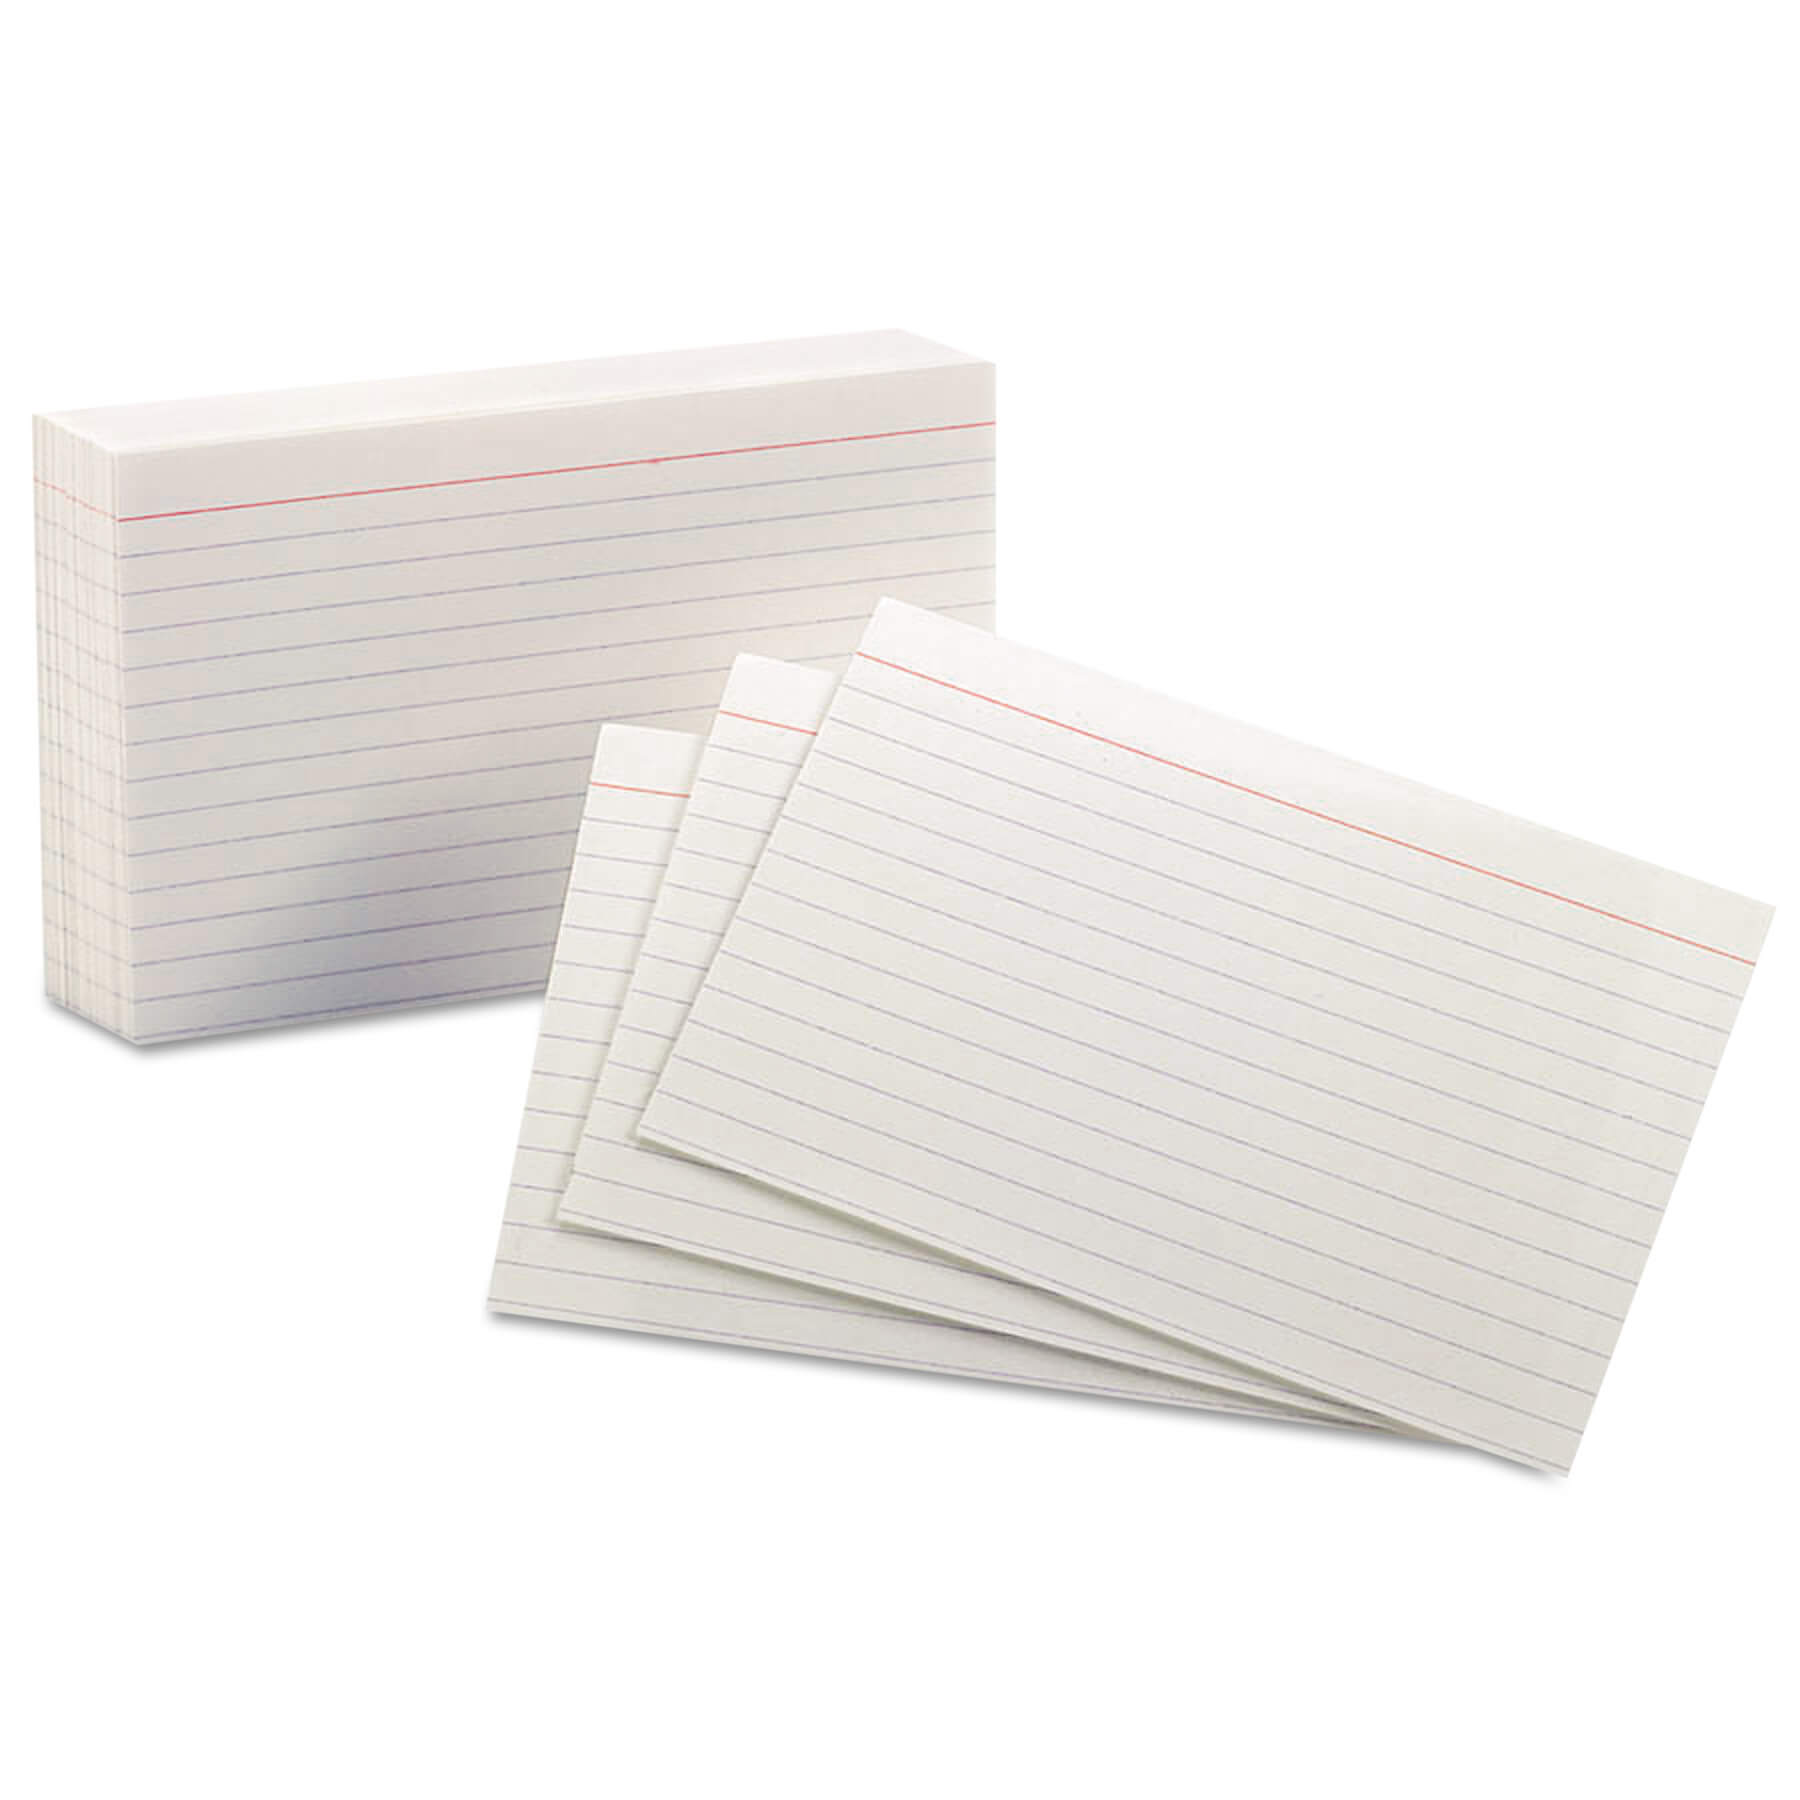 Index Card 4X6 – Major.magdalene Project With 4X6 Note Card Template